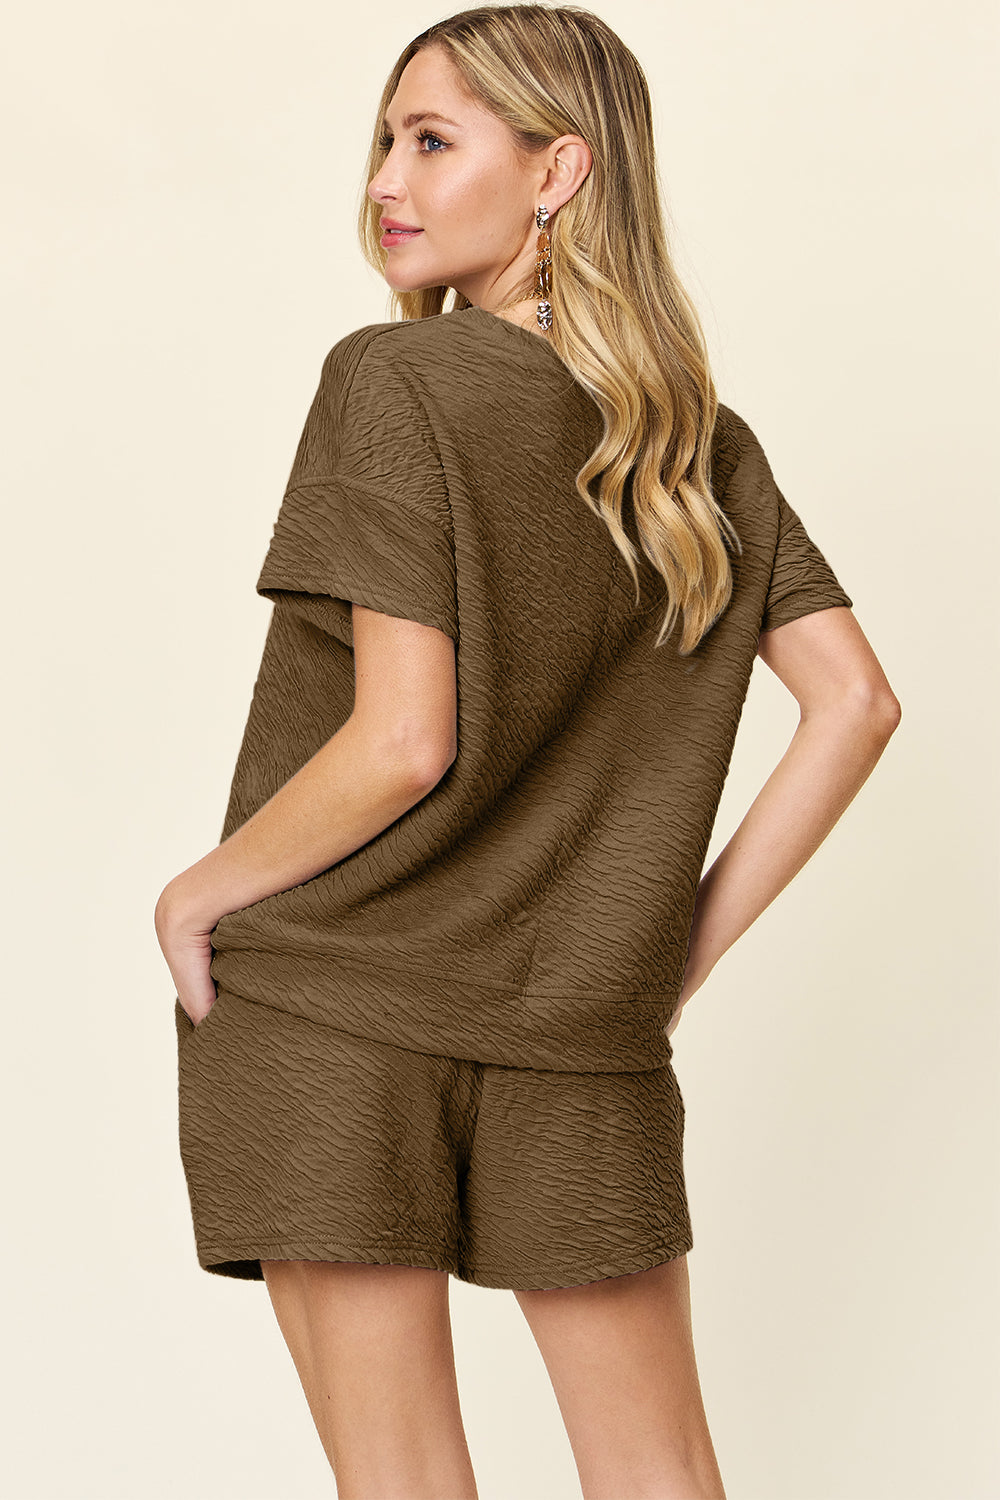 Lounging Around Texture Short Sleeve T-Shirt and Drawstring Shorts Set in Multiple Colors Southern Soul Collectives